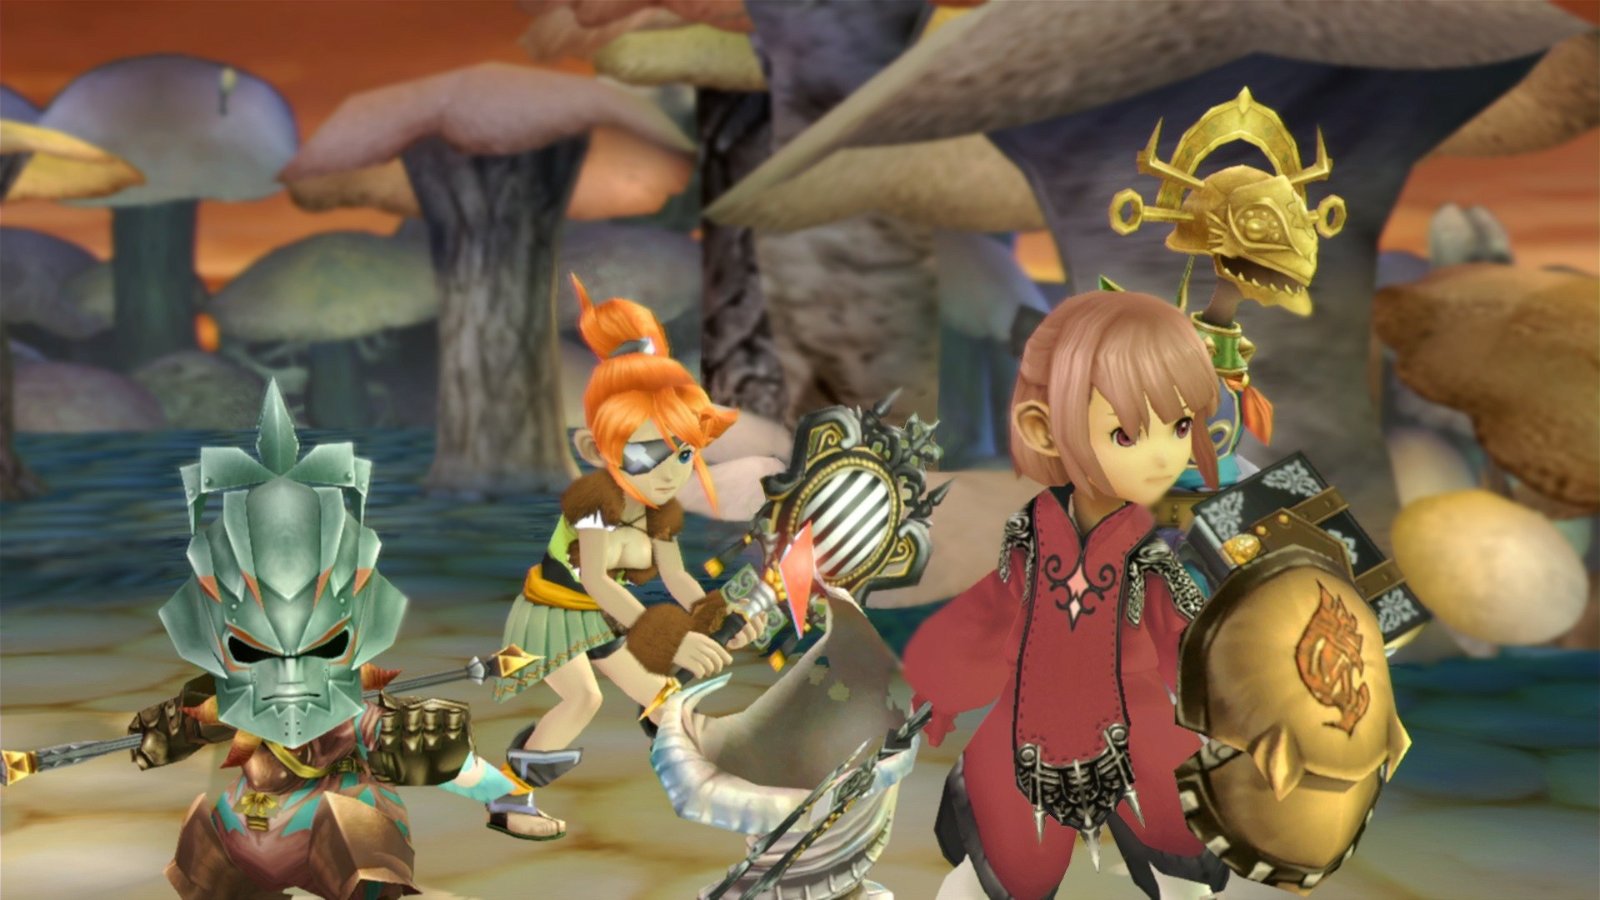 final fantasy remastered, final fantasy crystal chronicles remastered edition,switch, nintendo switch, ps4, playstation 4,japan, release date, gameplay, features, price, pre-order now, square enix